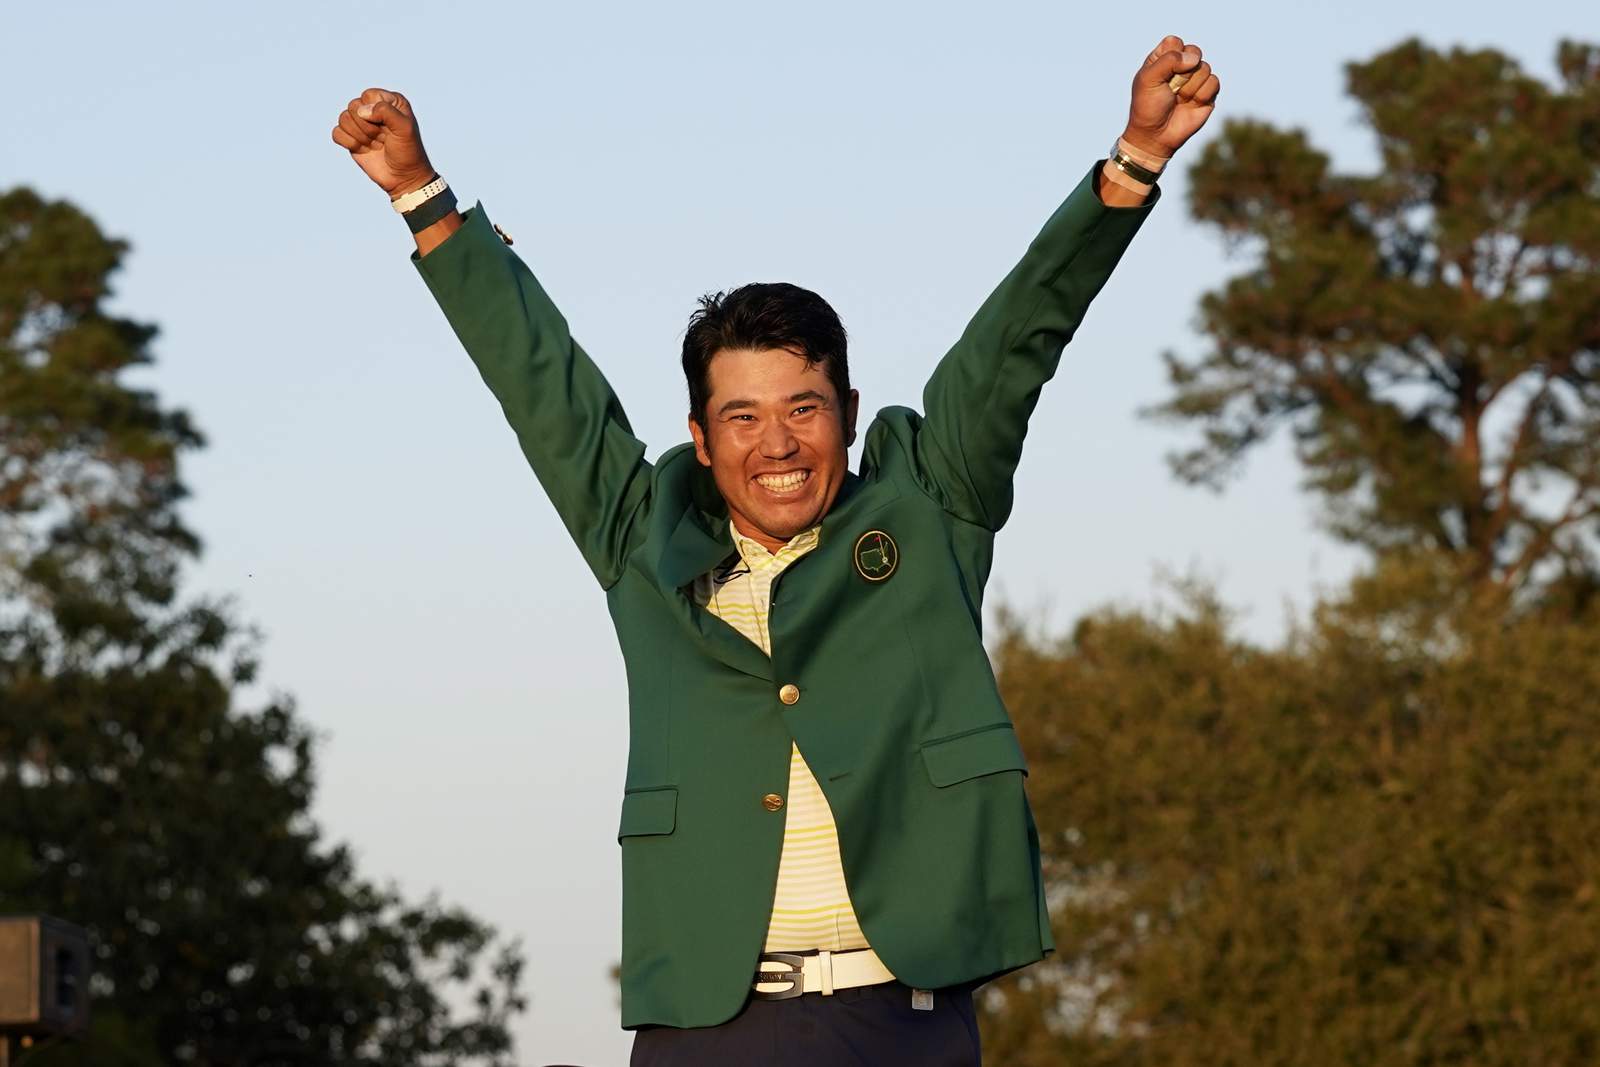 Japan's champion: Matsuyama wins the Masters for his nation